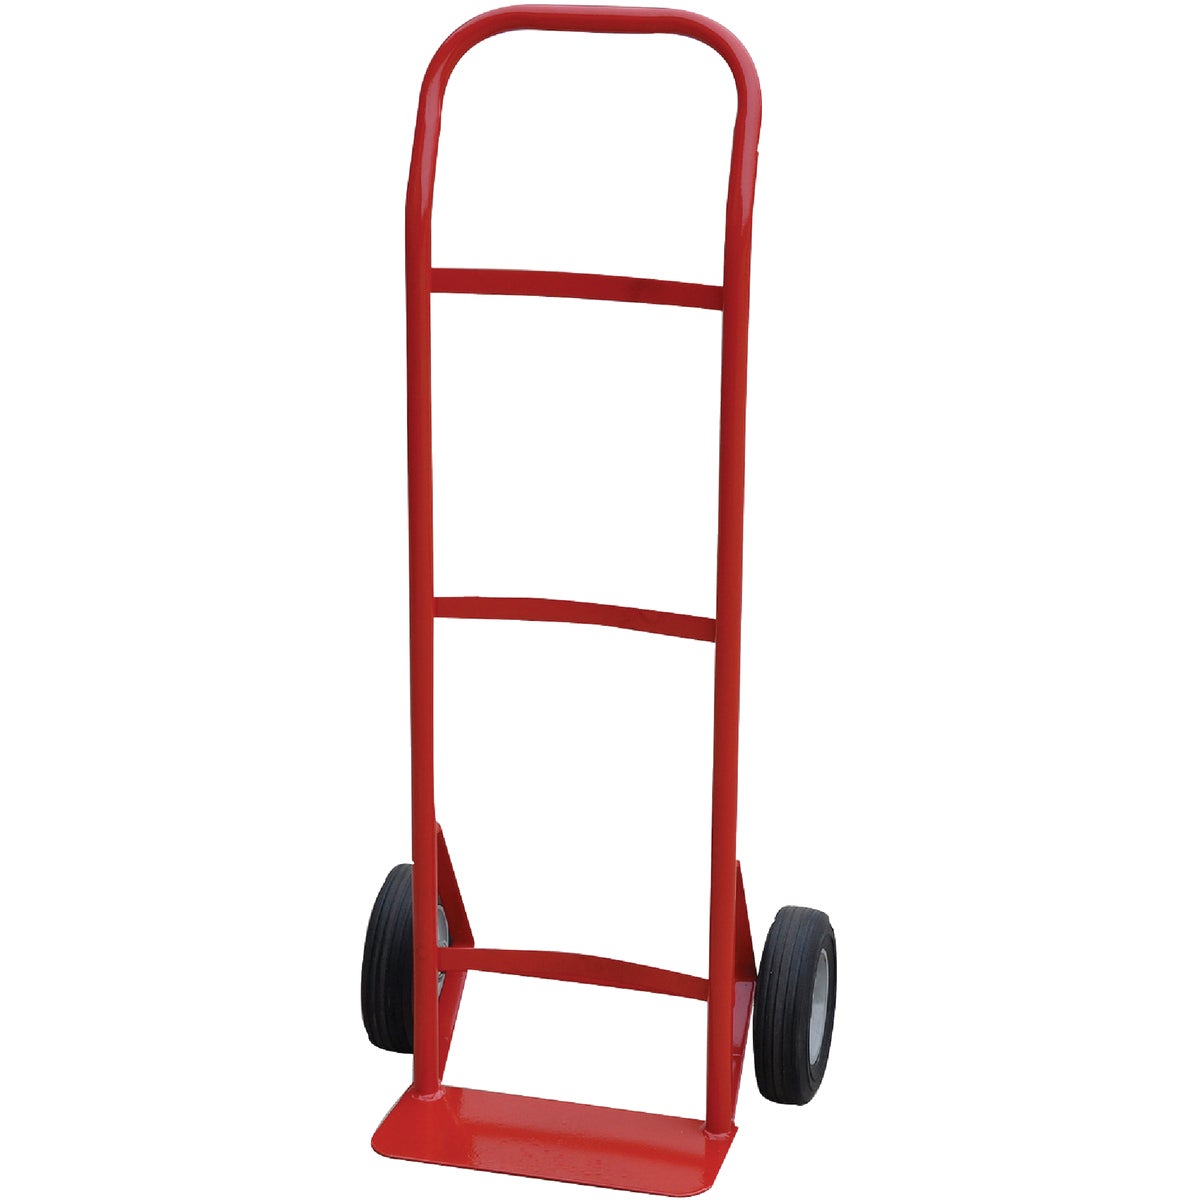 Item 719850, Hand truck featuring steel frame construction with flow back handle.